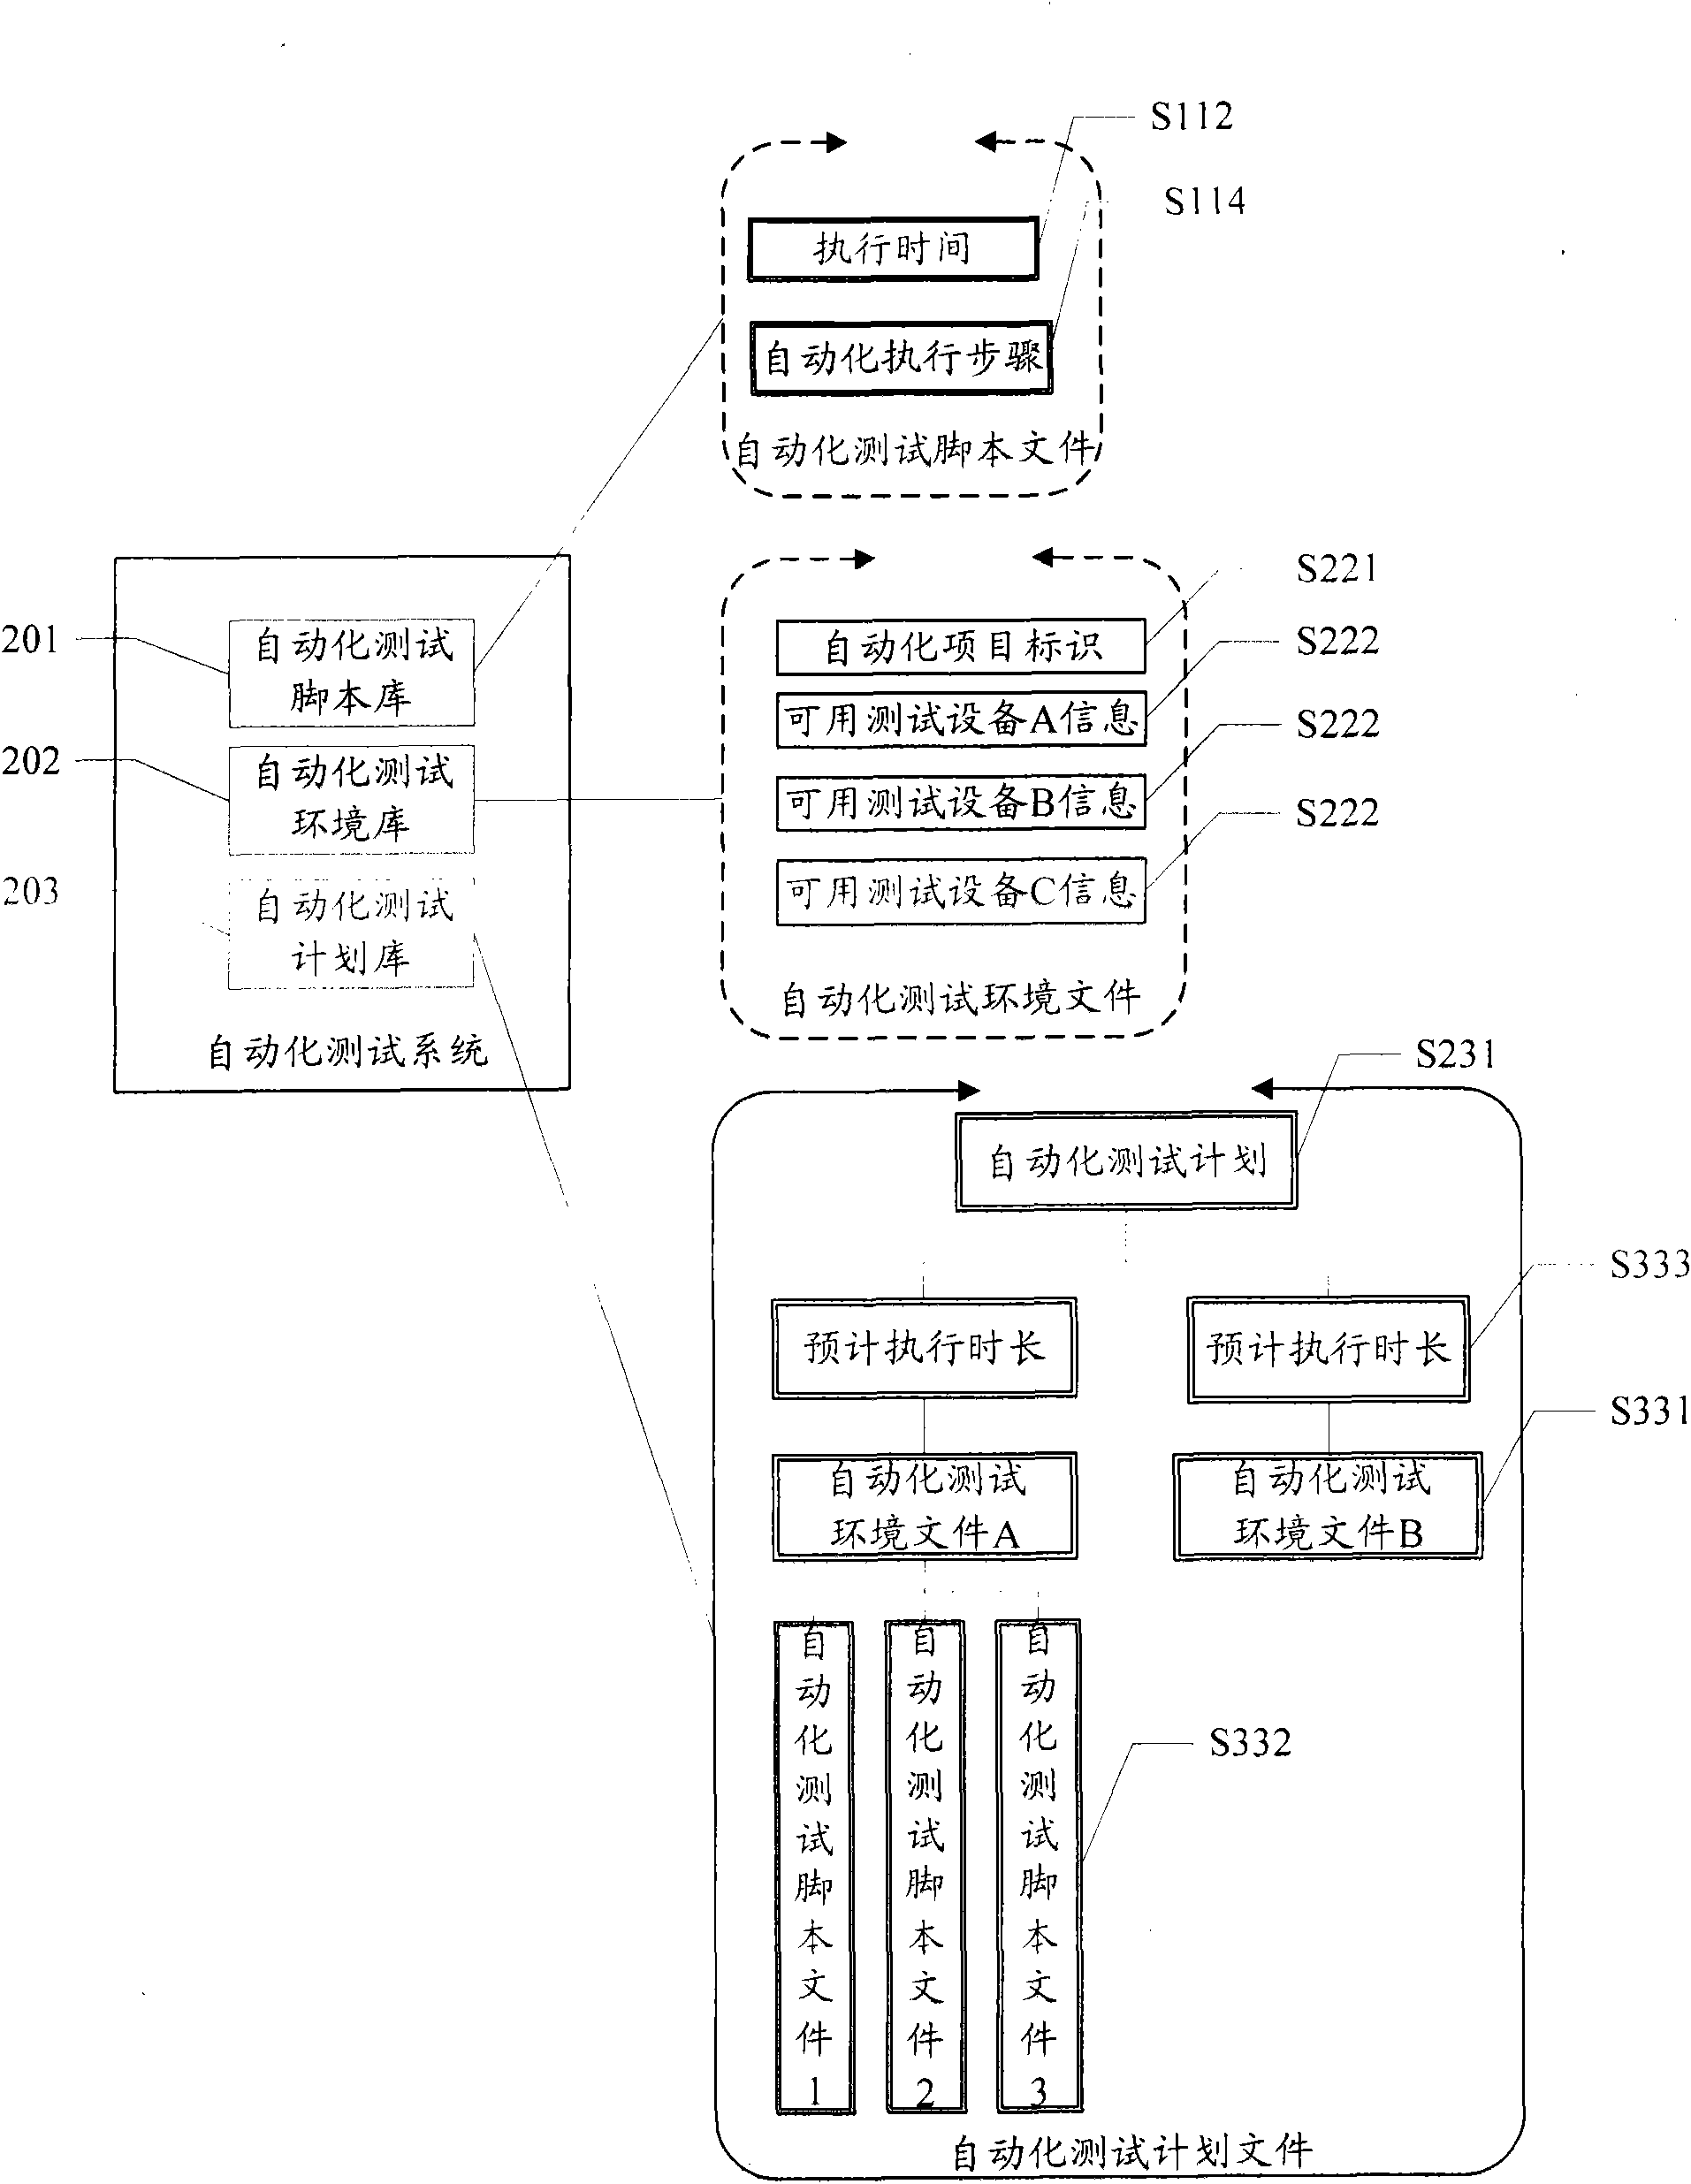 Method and system for scheduling test plan